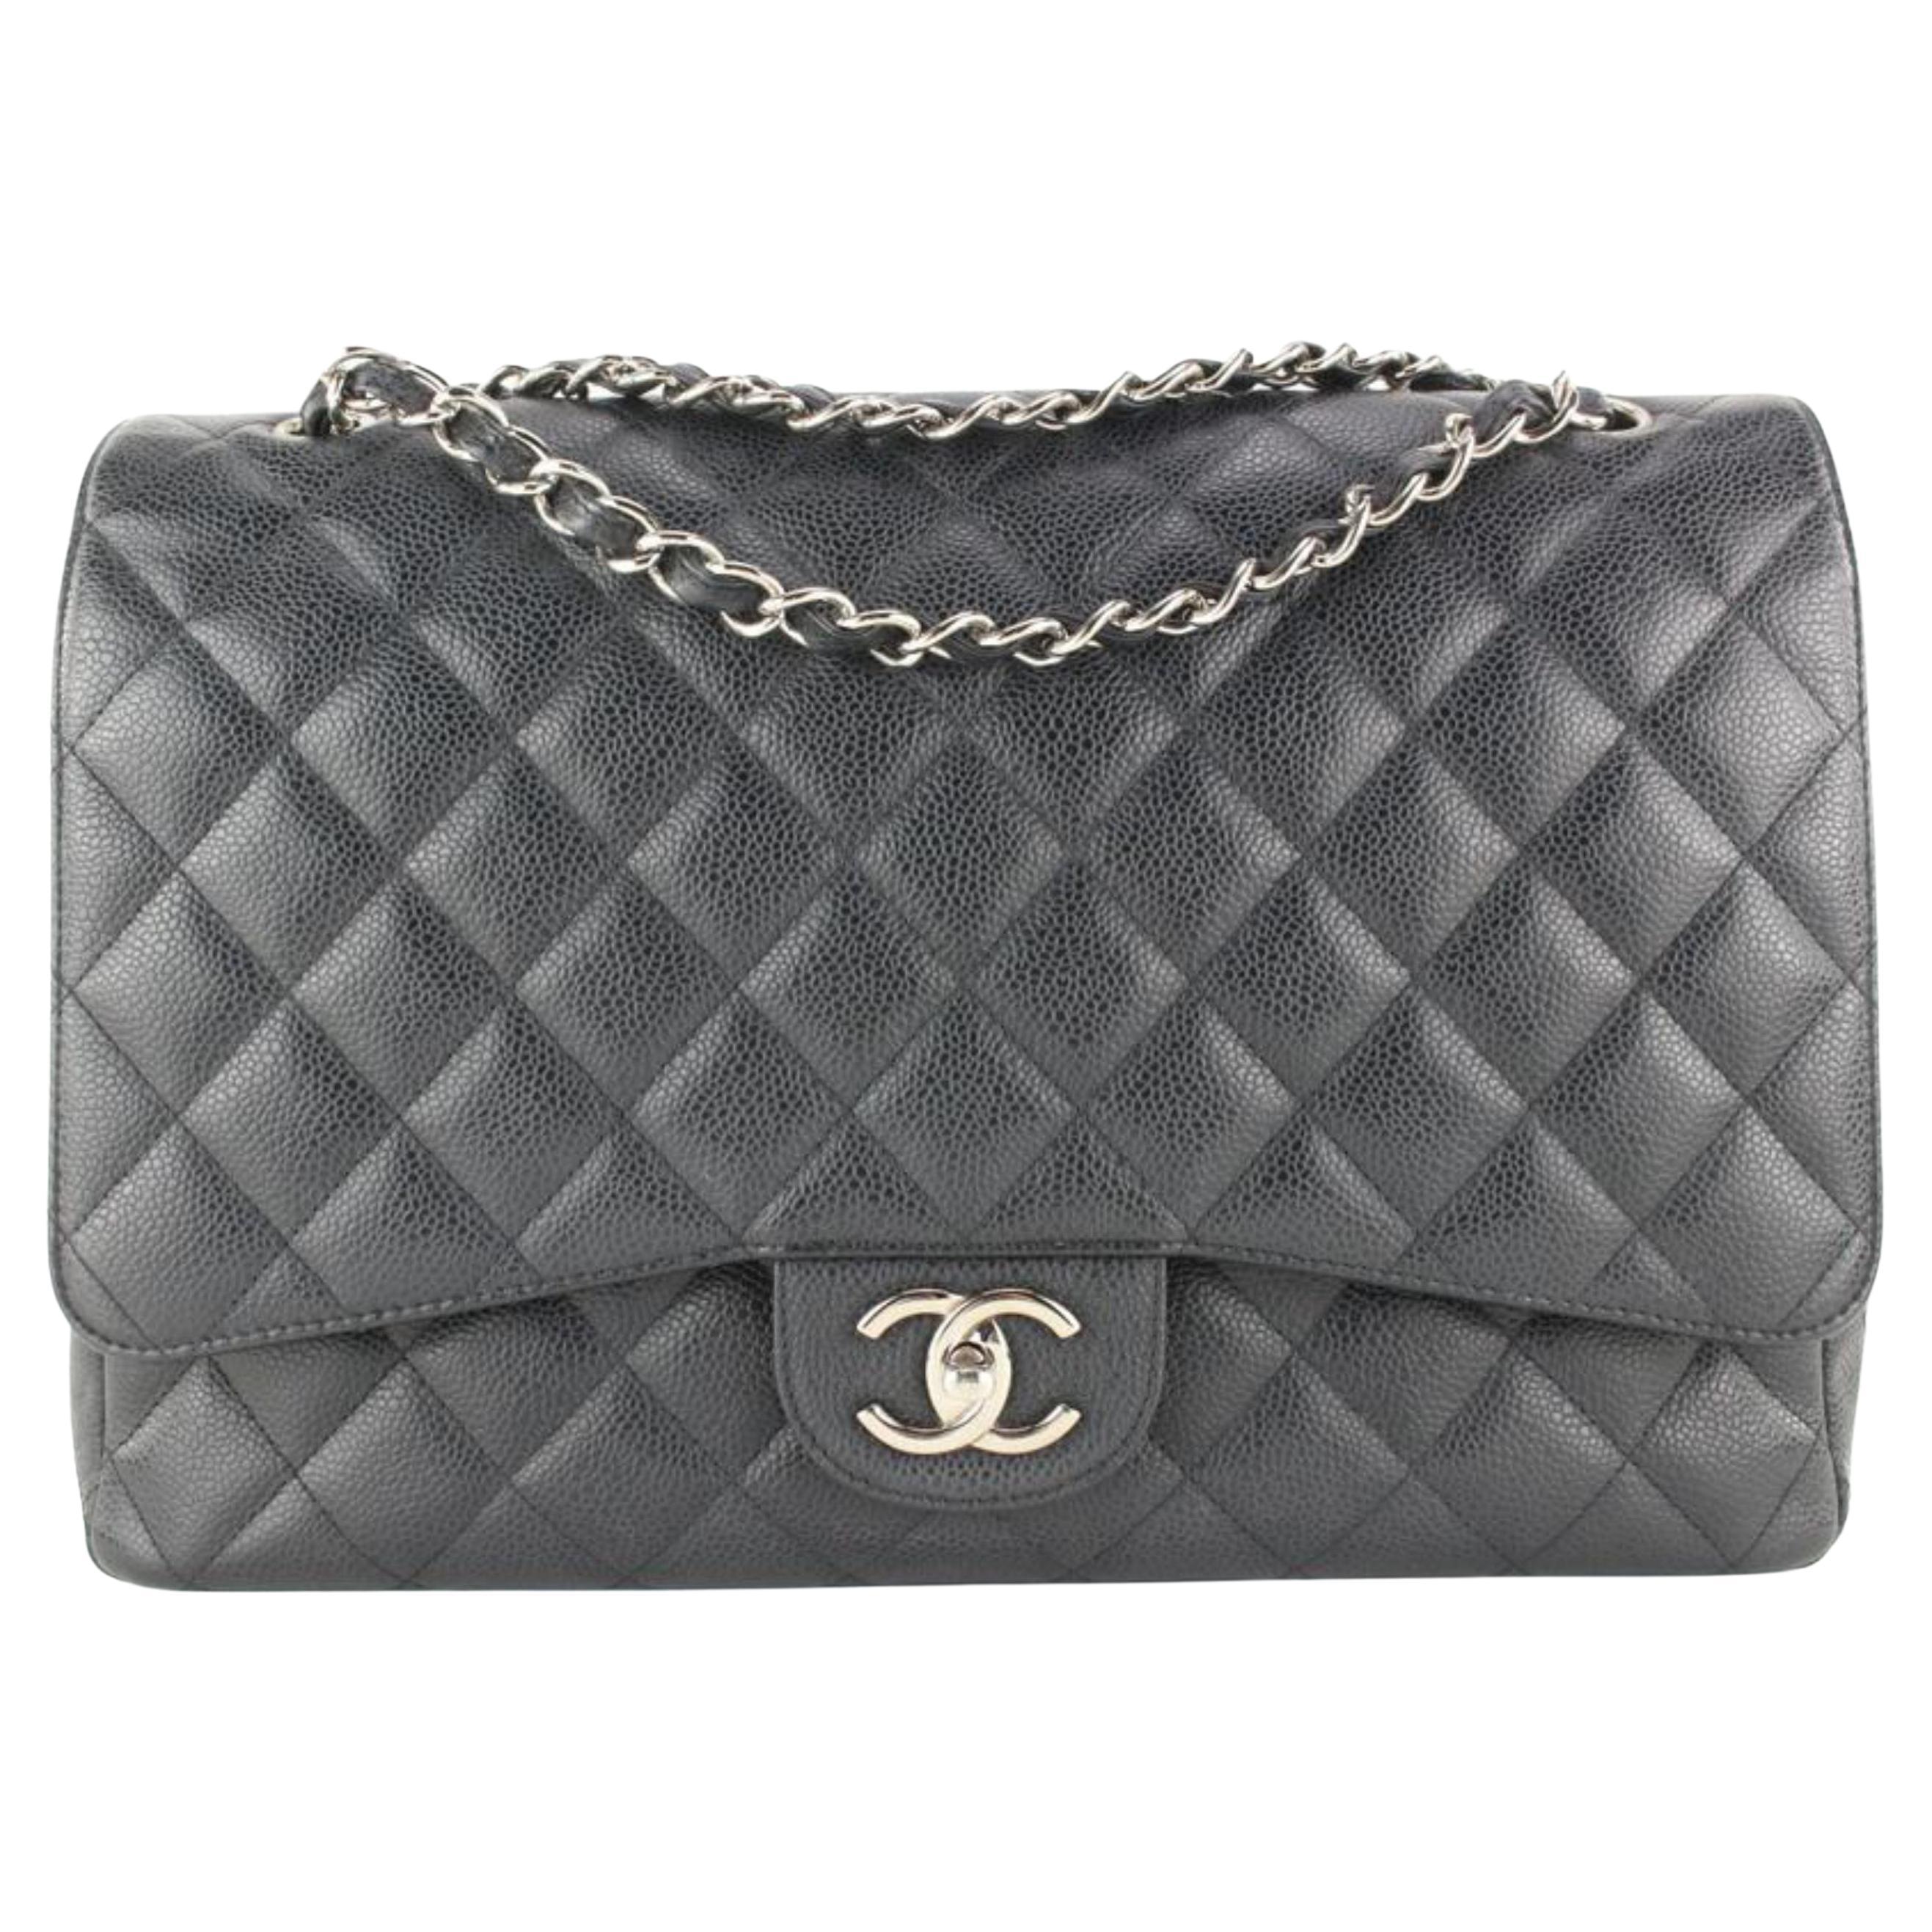 Chanel Black Quilted Caviar Leather Maxi Double Flap SHW 1CJ1028